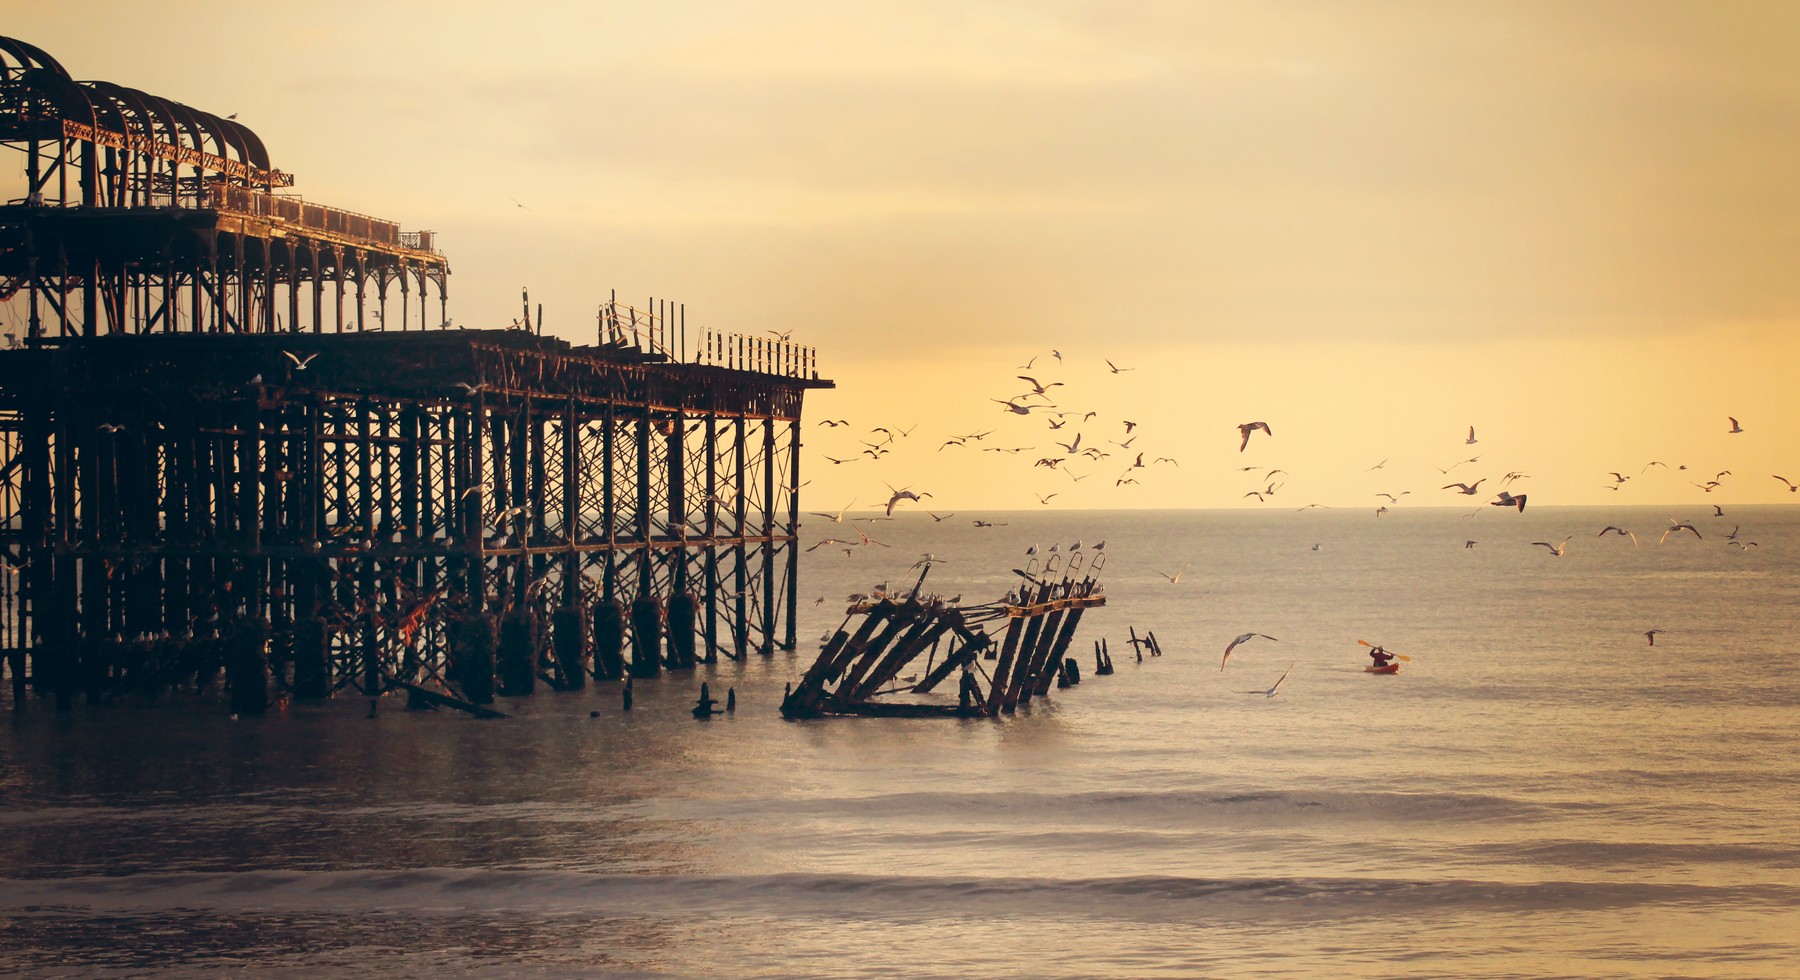 An evening shot with a golden sunset showing a group of seagulls flying around West Pier in Brighton